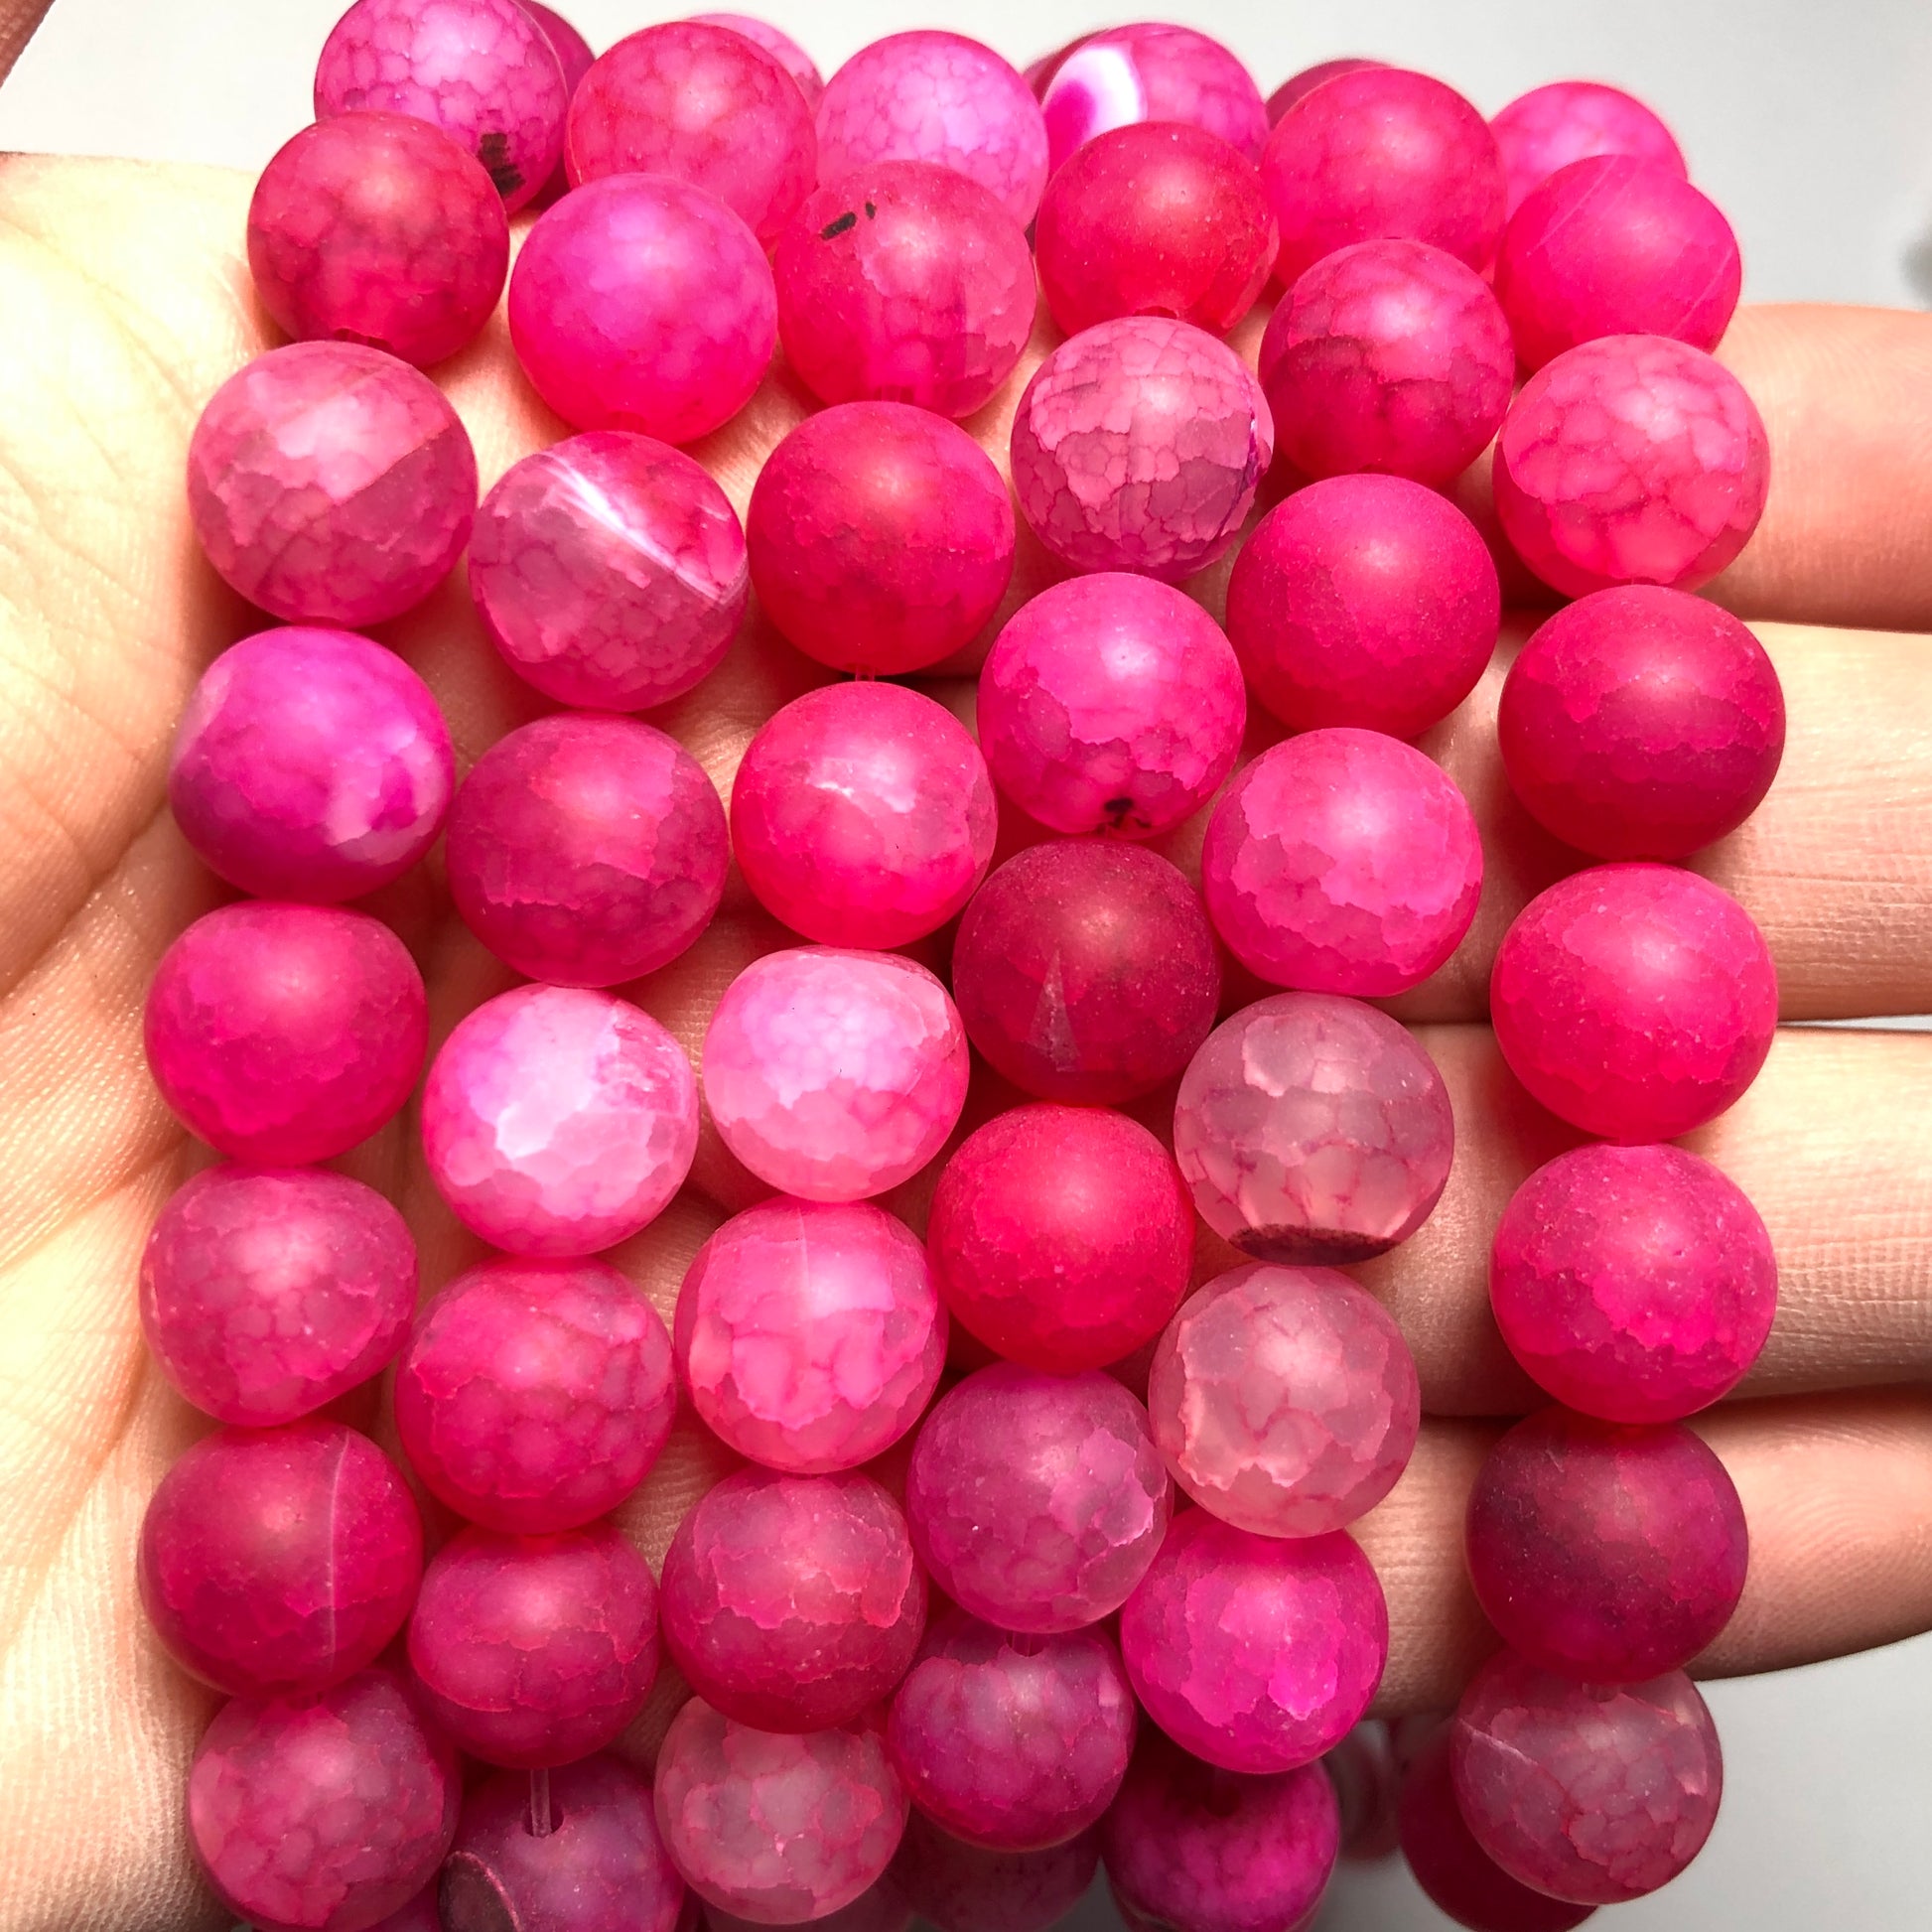 2 Strands/lot 10mm Matte Fuchsia Dragon Agate Round Stone Beads Stone Beads Breast Cancer Awareness Faceted Agate Beads Charms Beads Beyond